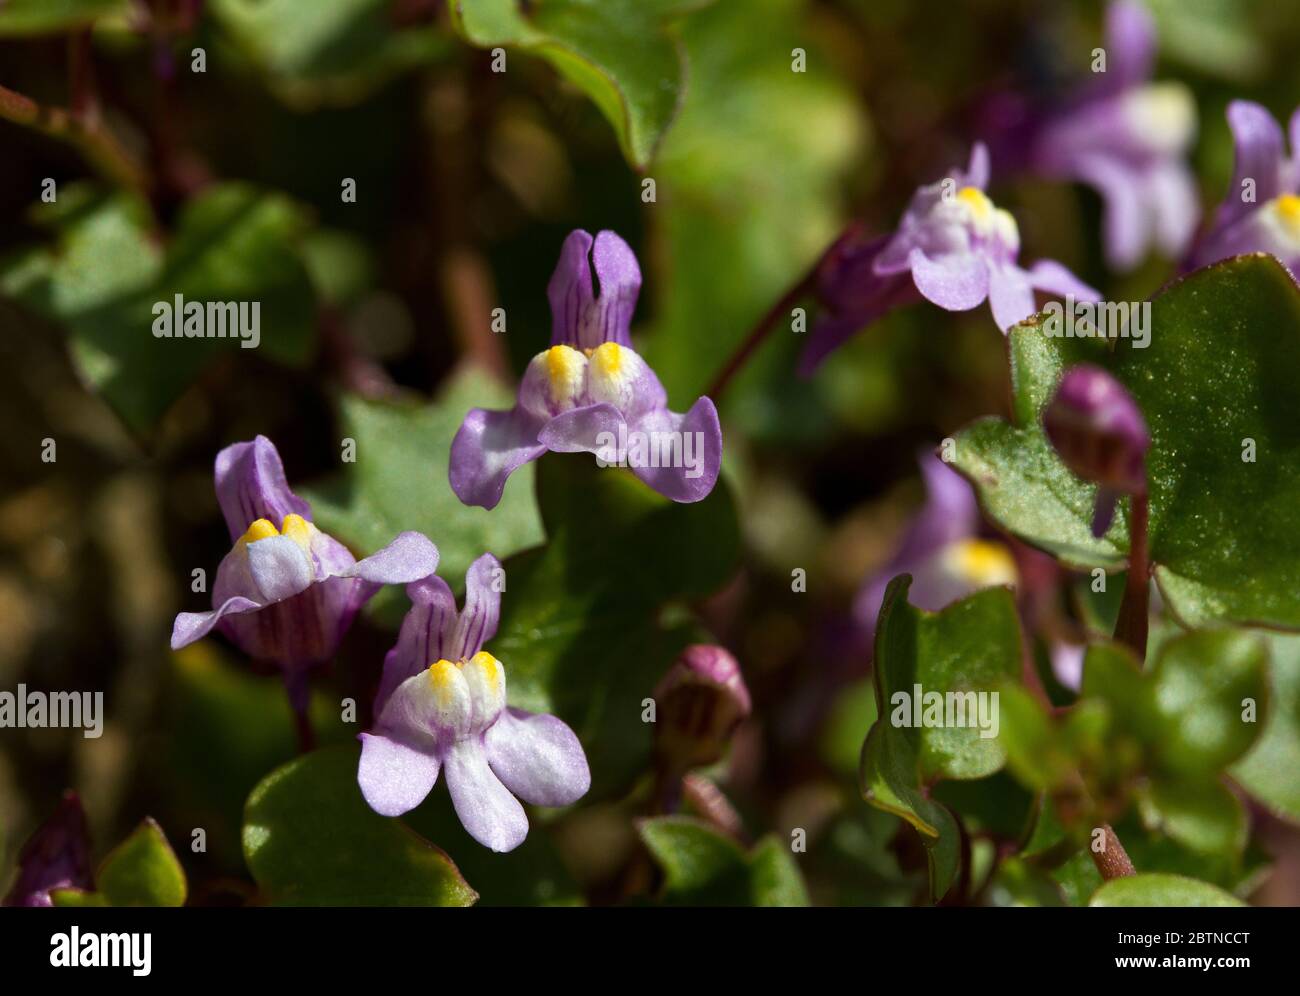 The Ivy-leaved Toadflax is a small delicate looking plant with Snap-dragon like flowers but specialising in rocky habitats they are extremely hardy Stock Photo